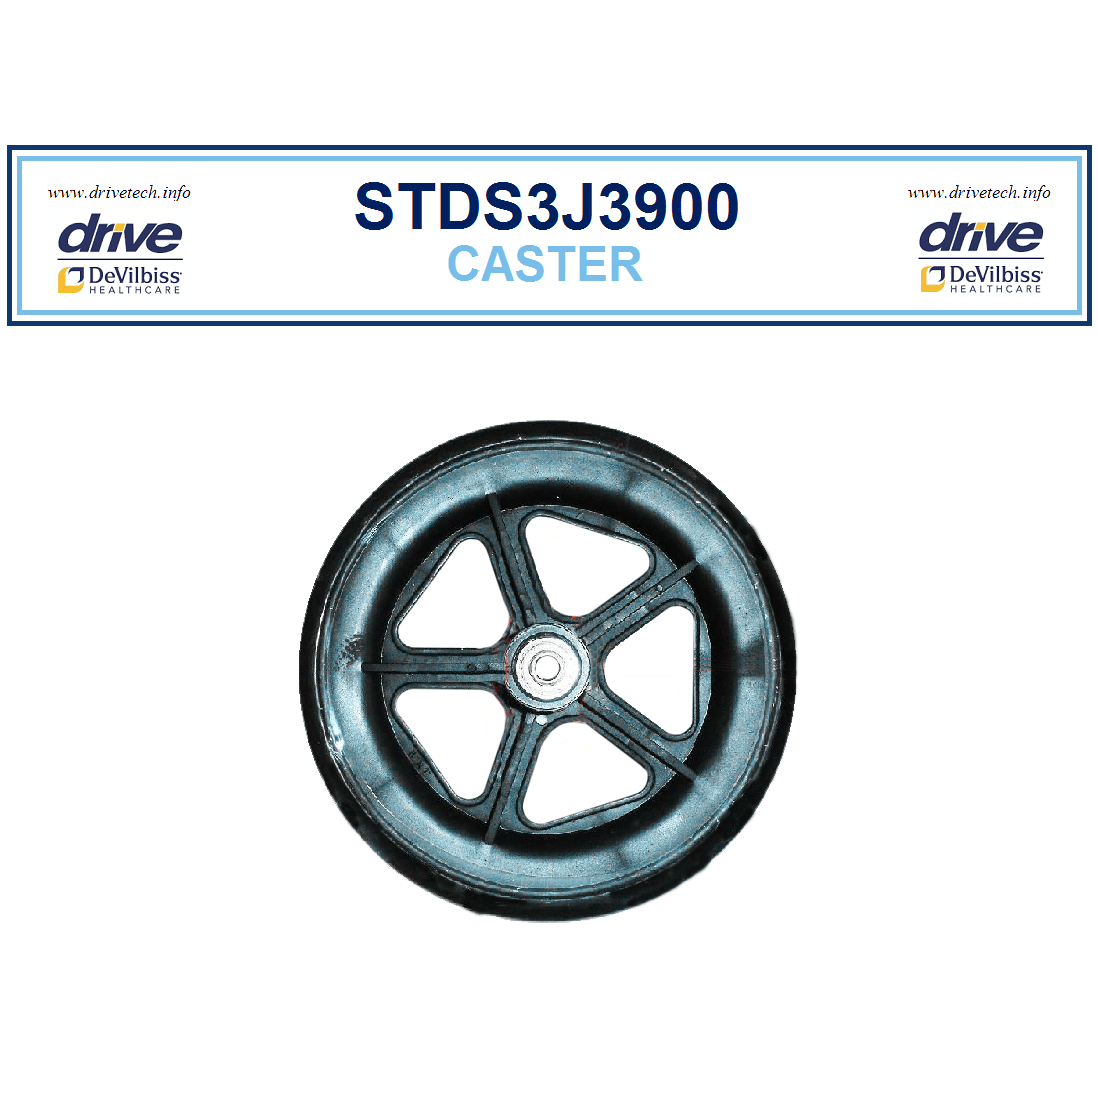 Drive STDS3J3900 Front Caster wheel for ATC17 & ATC19 Transport Chairs